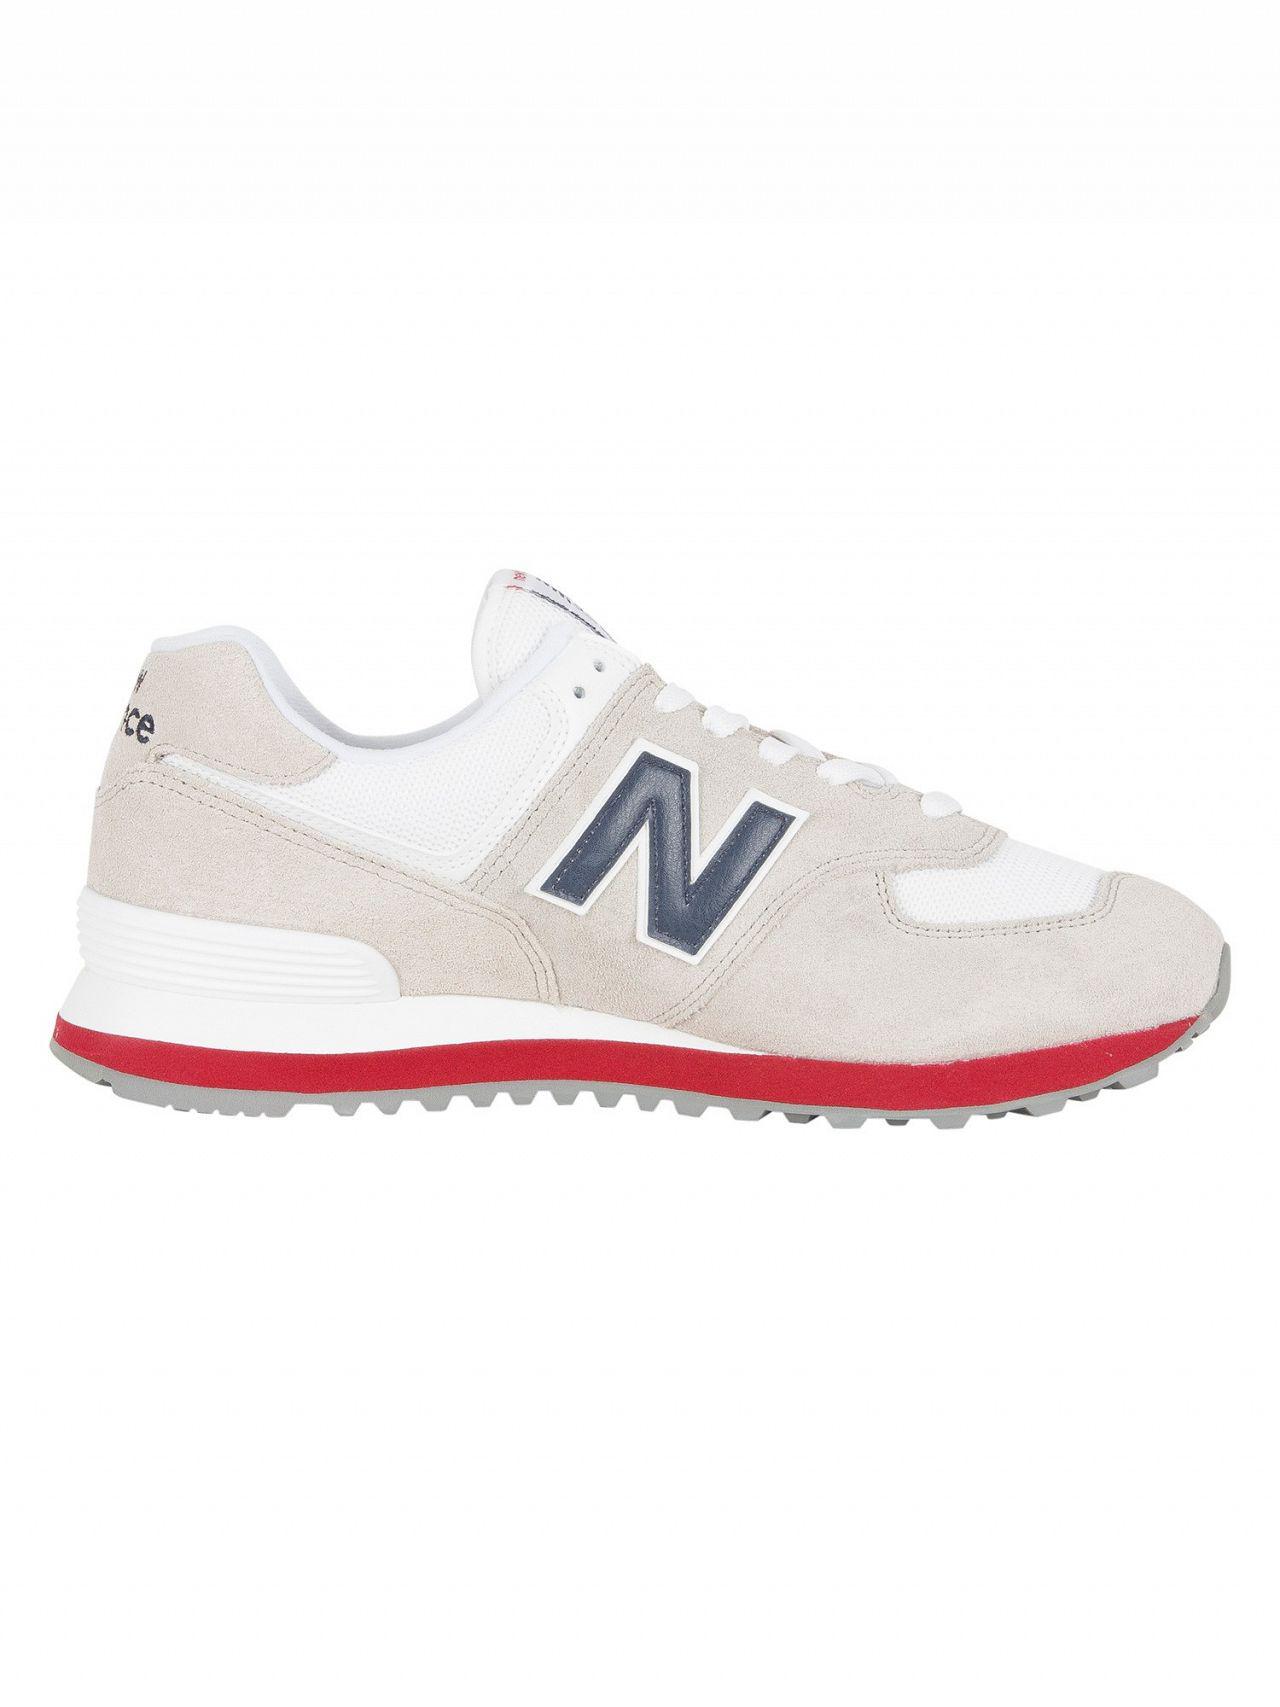 New Balance Beige 574 Suede Trainers in Natural for Men - Lyst